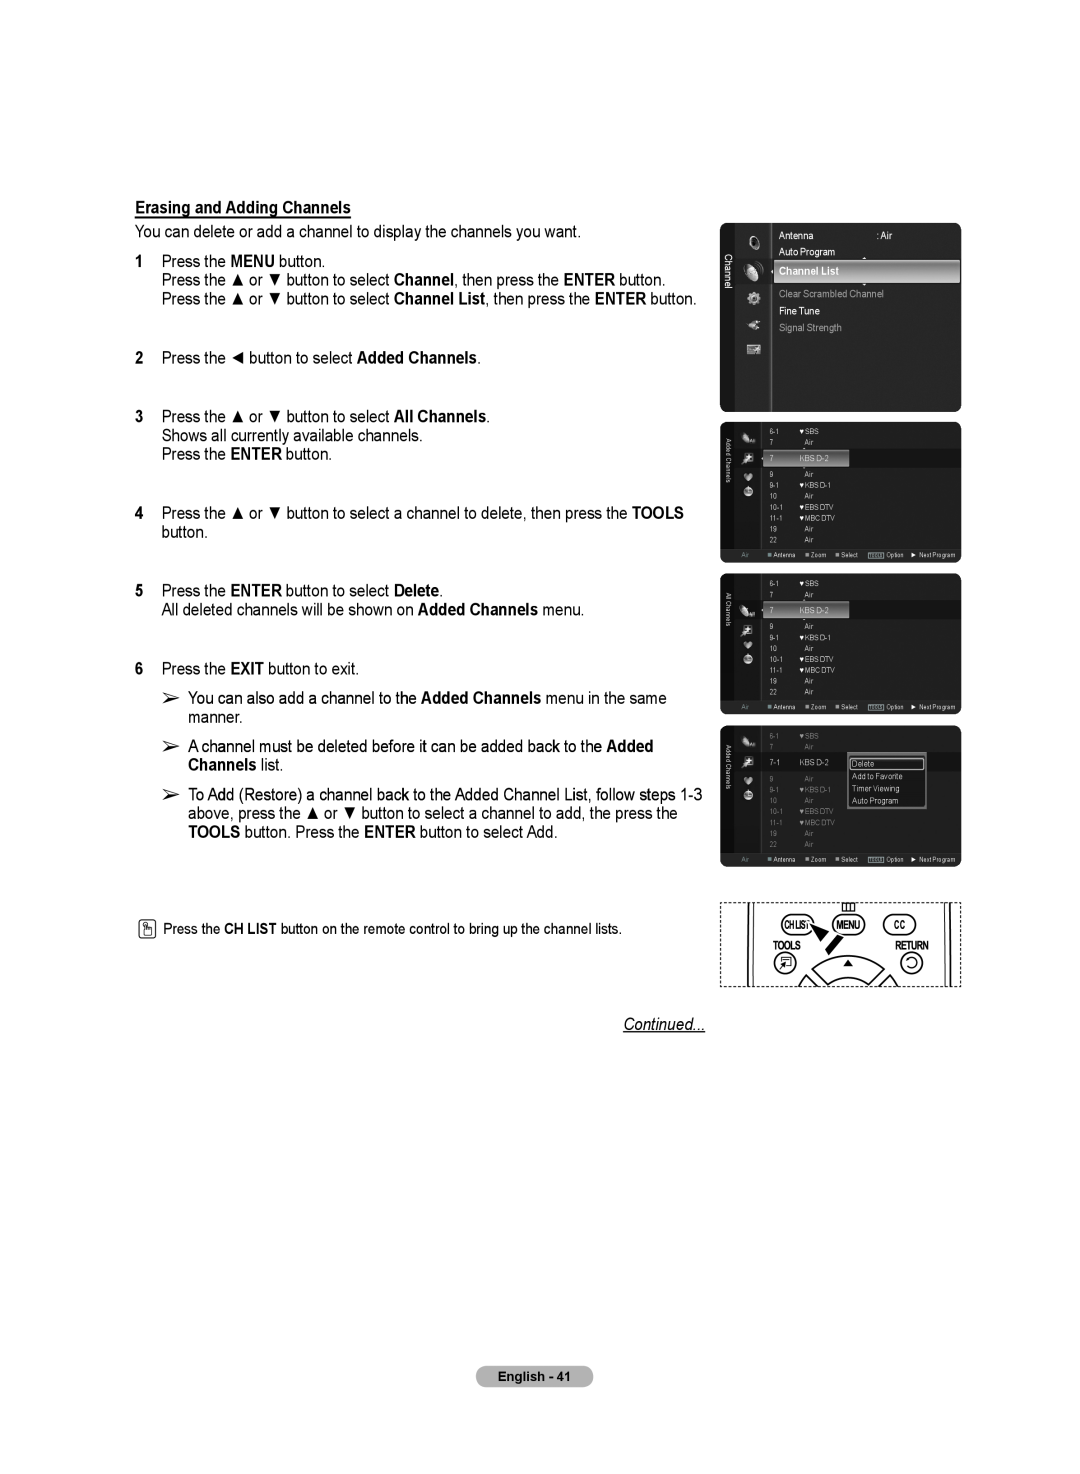 Samsung 510 user manual Erasing and Adding Channels, Continued 